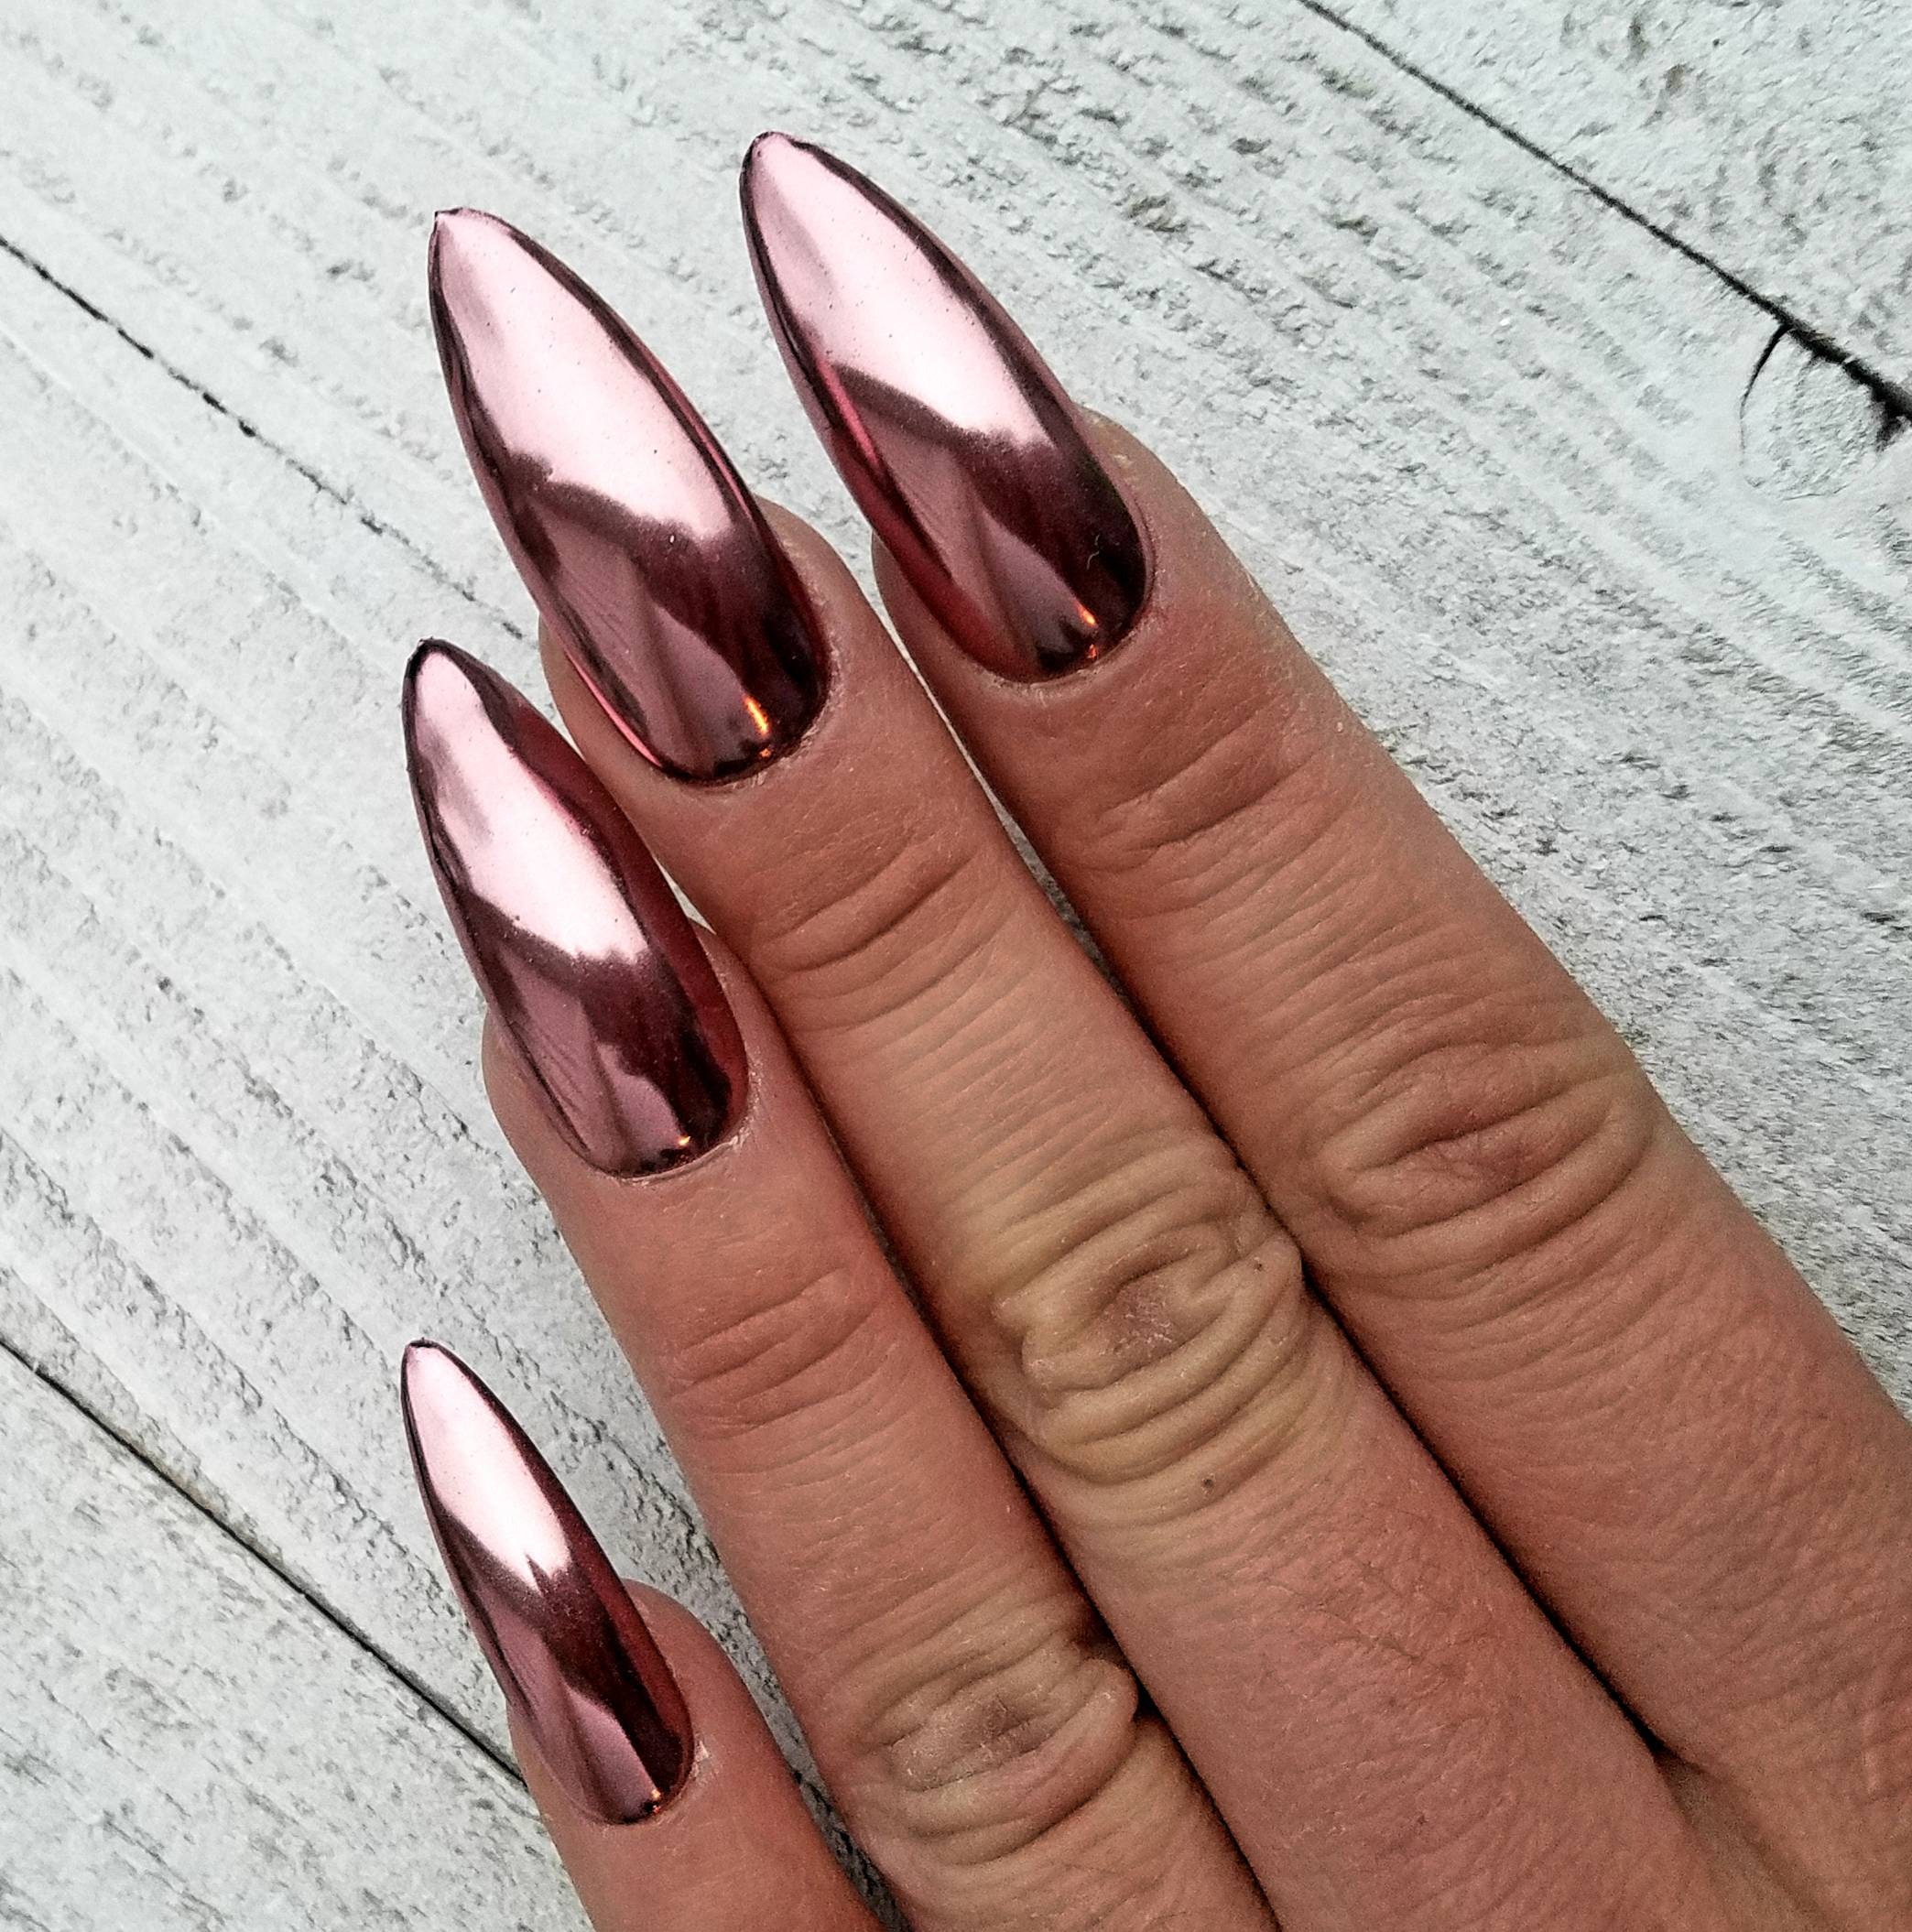 21 Awesome Ways to Wear Chrome Nails This Season | Polish and Pearls